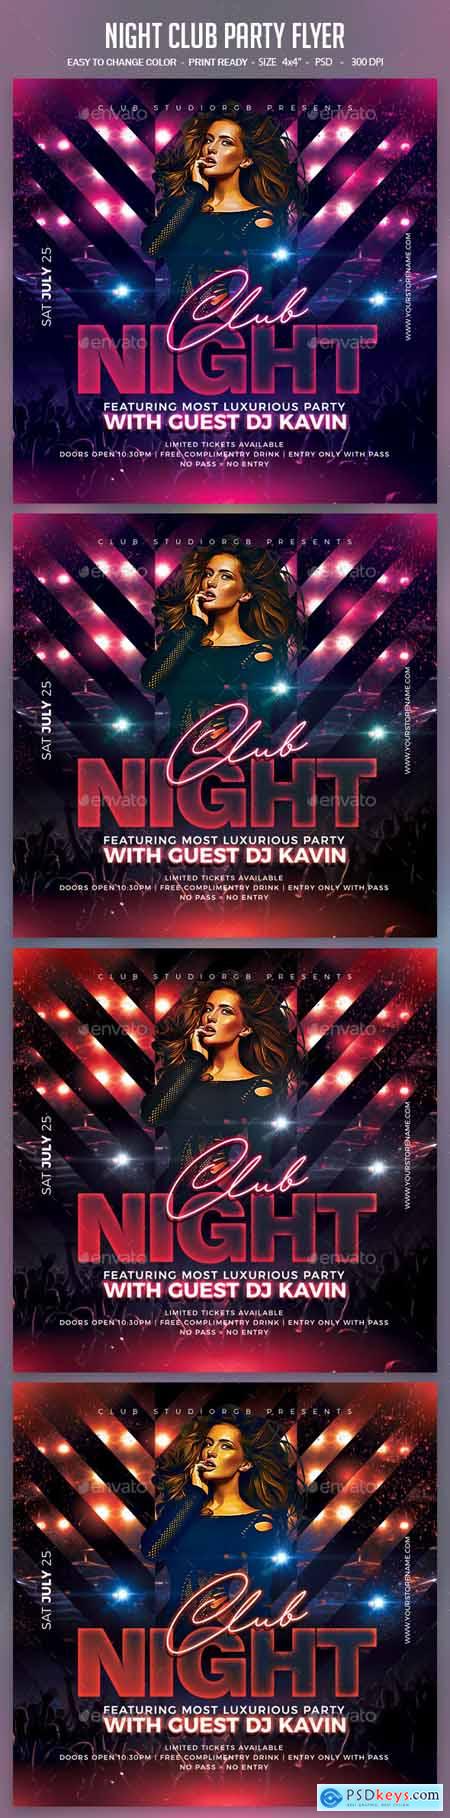 Graphicriver Night Club Party Flyer